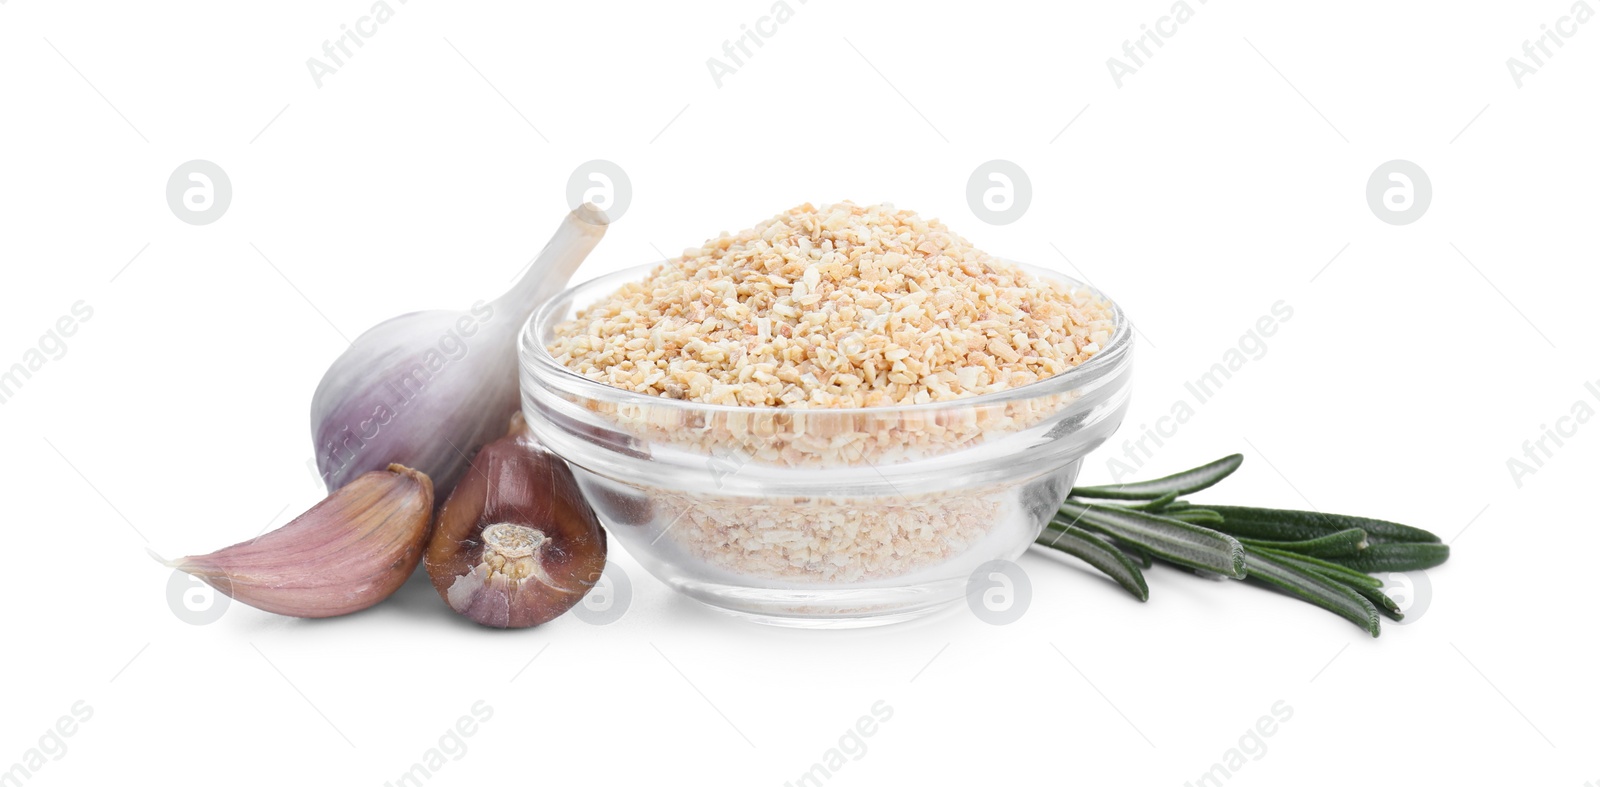 Photo of Dehydrated garlic granules in bowl, rosemary and unpeeled cloves isolated on white